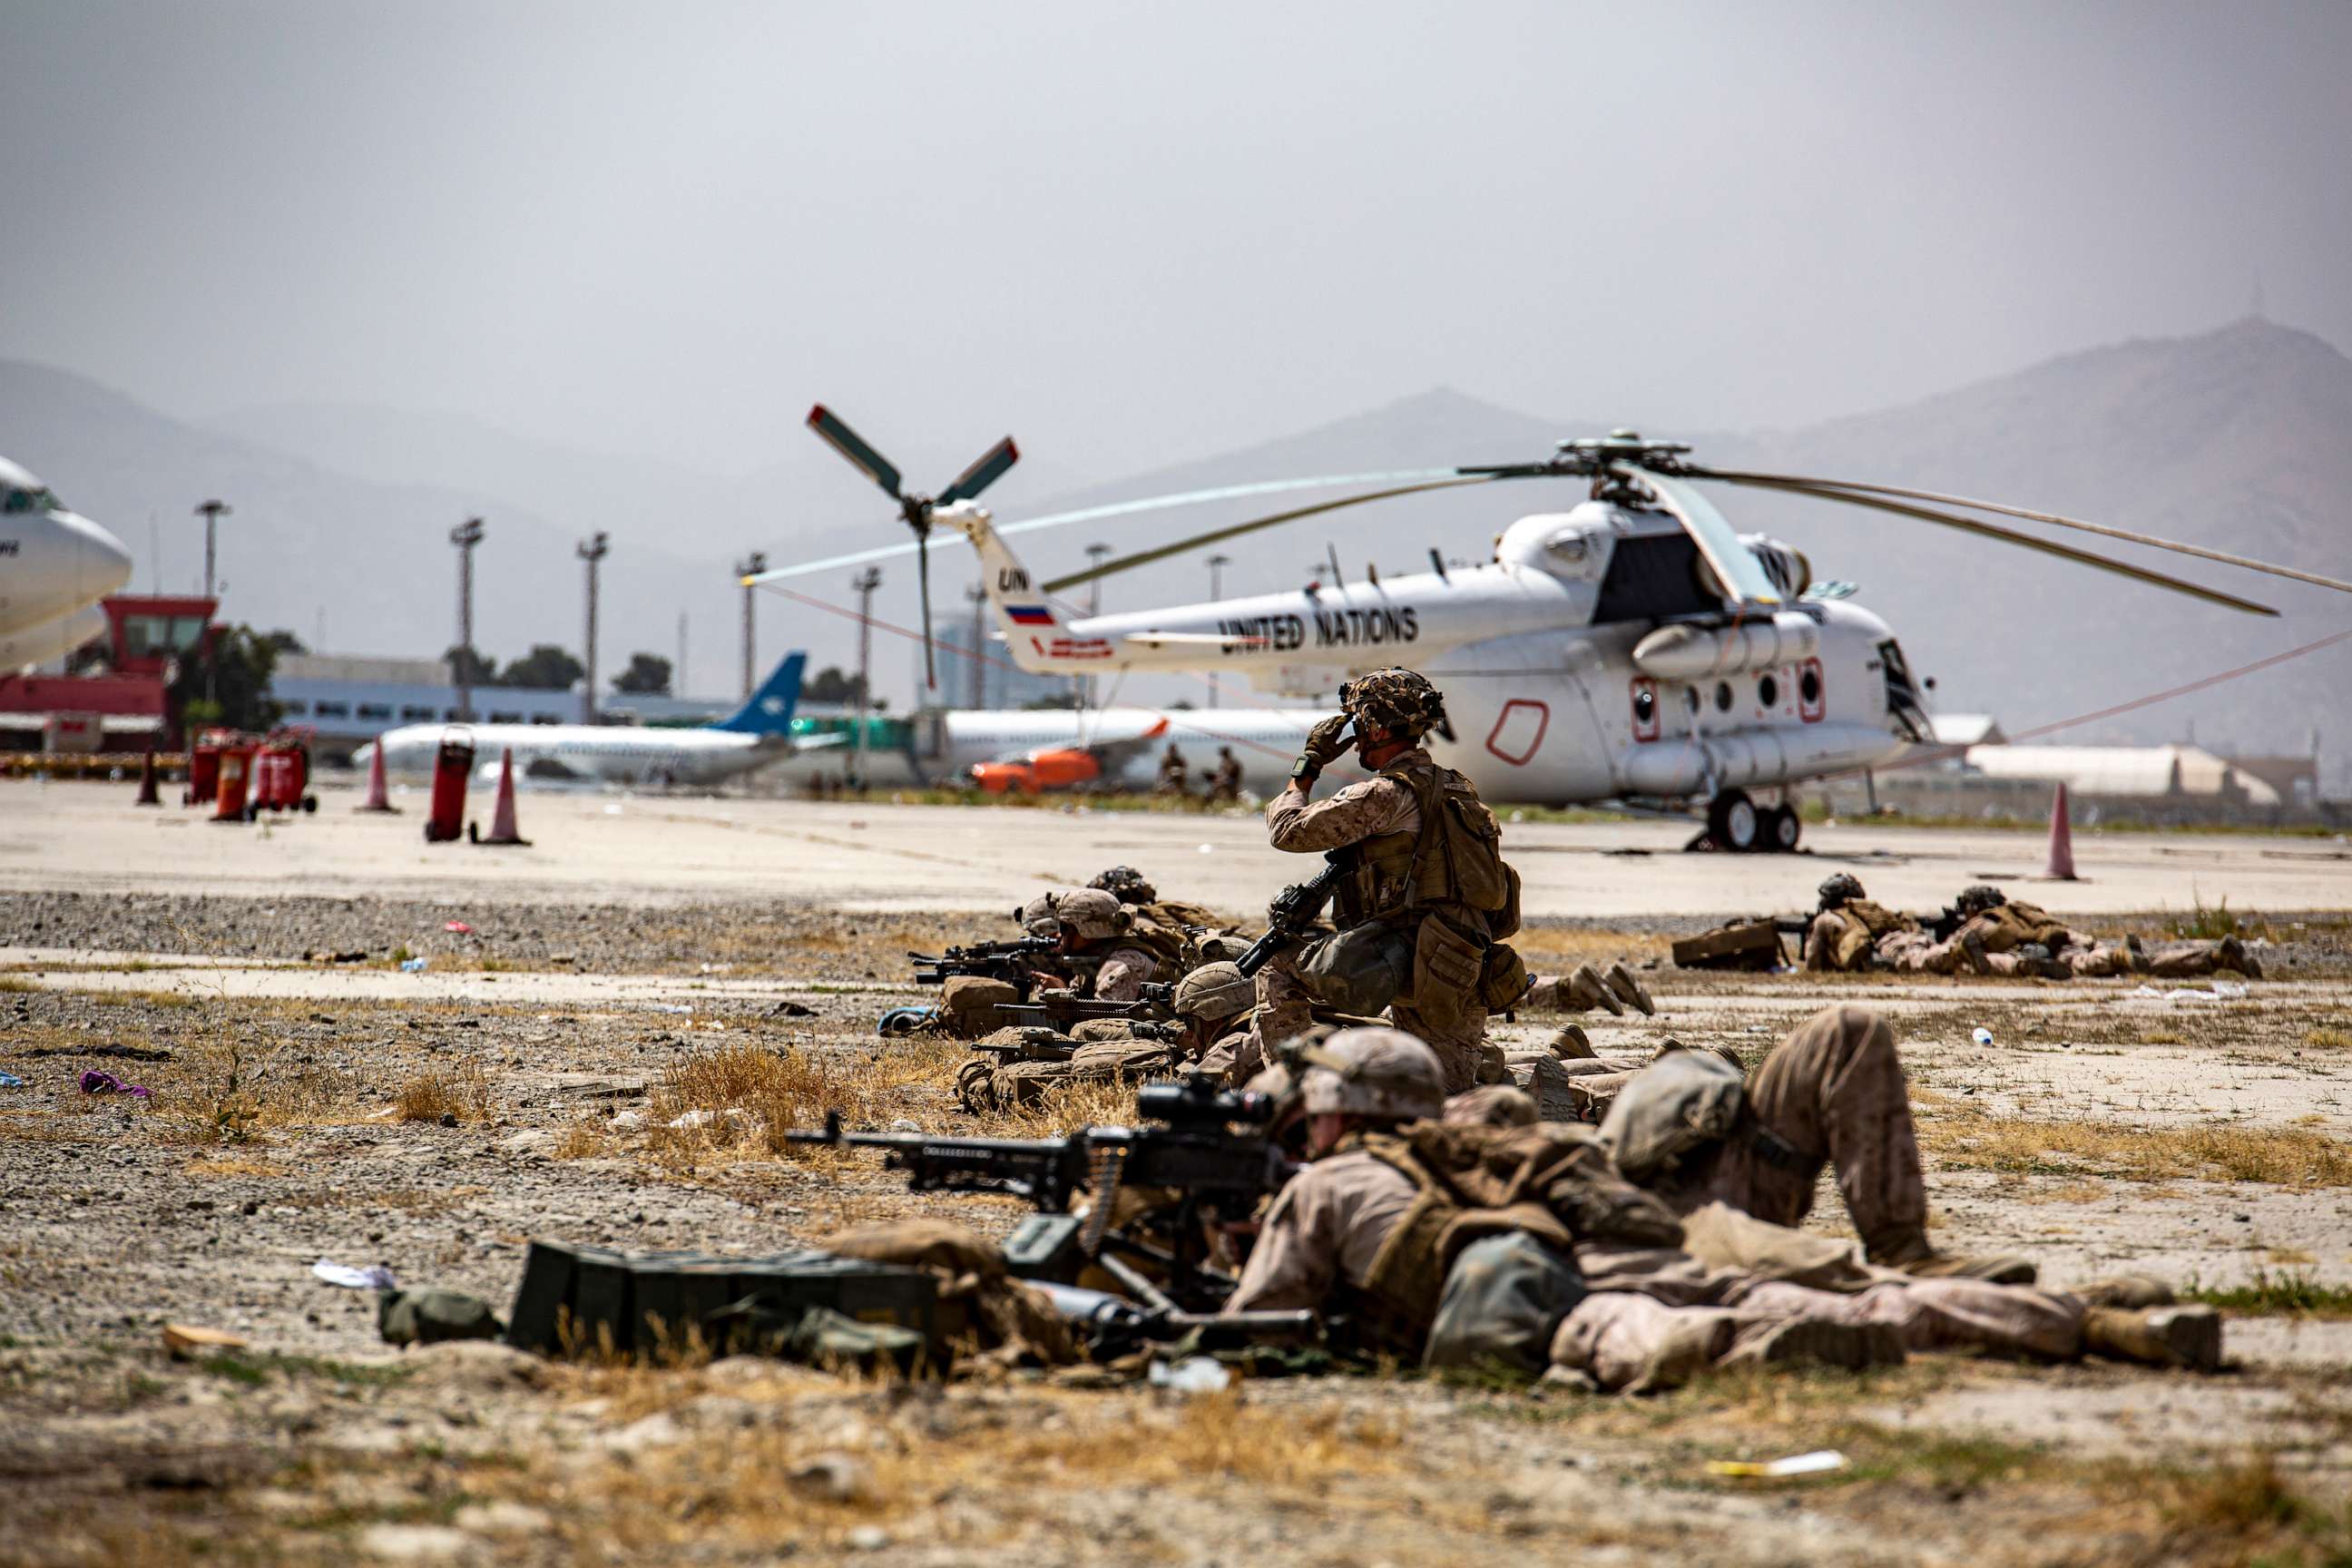 PHOTO: In this image provided by the U.S. Marine Corps, Marines assigned to the Special Purpose Marine Air Ground Task Force-Crisis Response-Central Command provide security at Hamid Karzai International Airport in Kabul, Afghanistan, on Aug. 18, 2021.